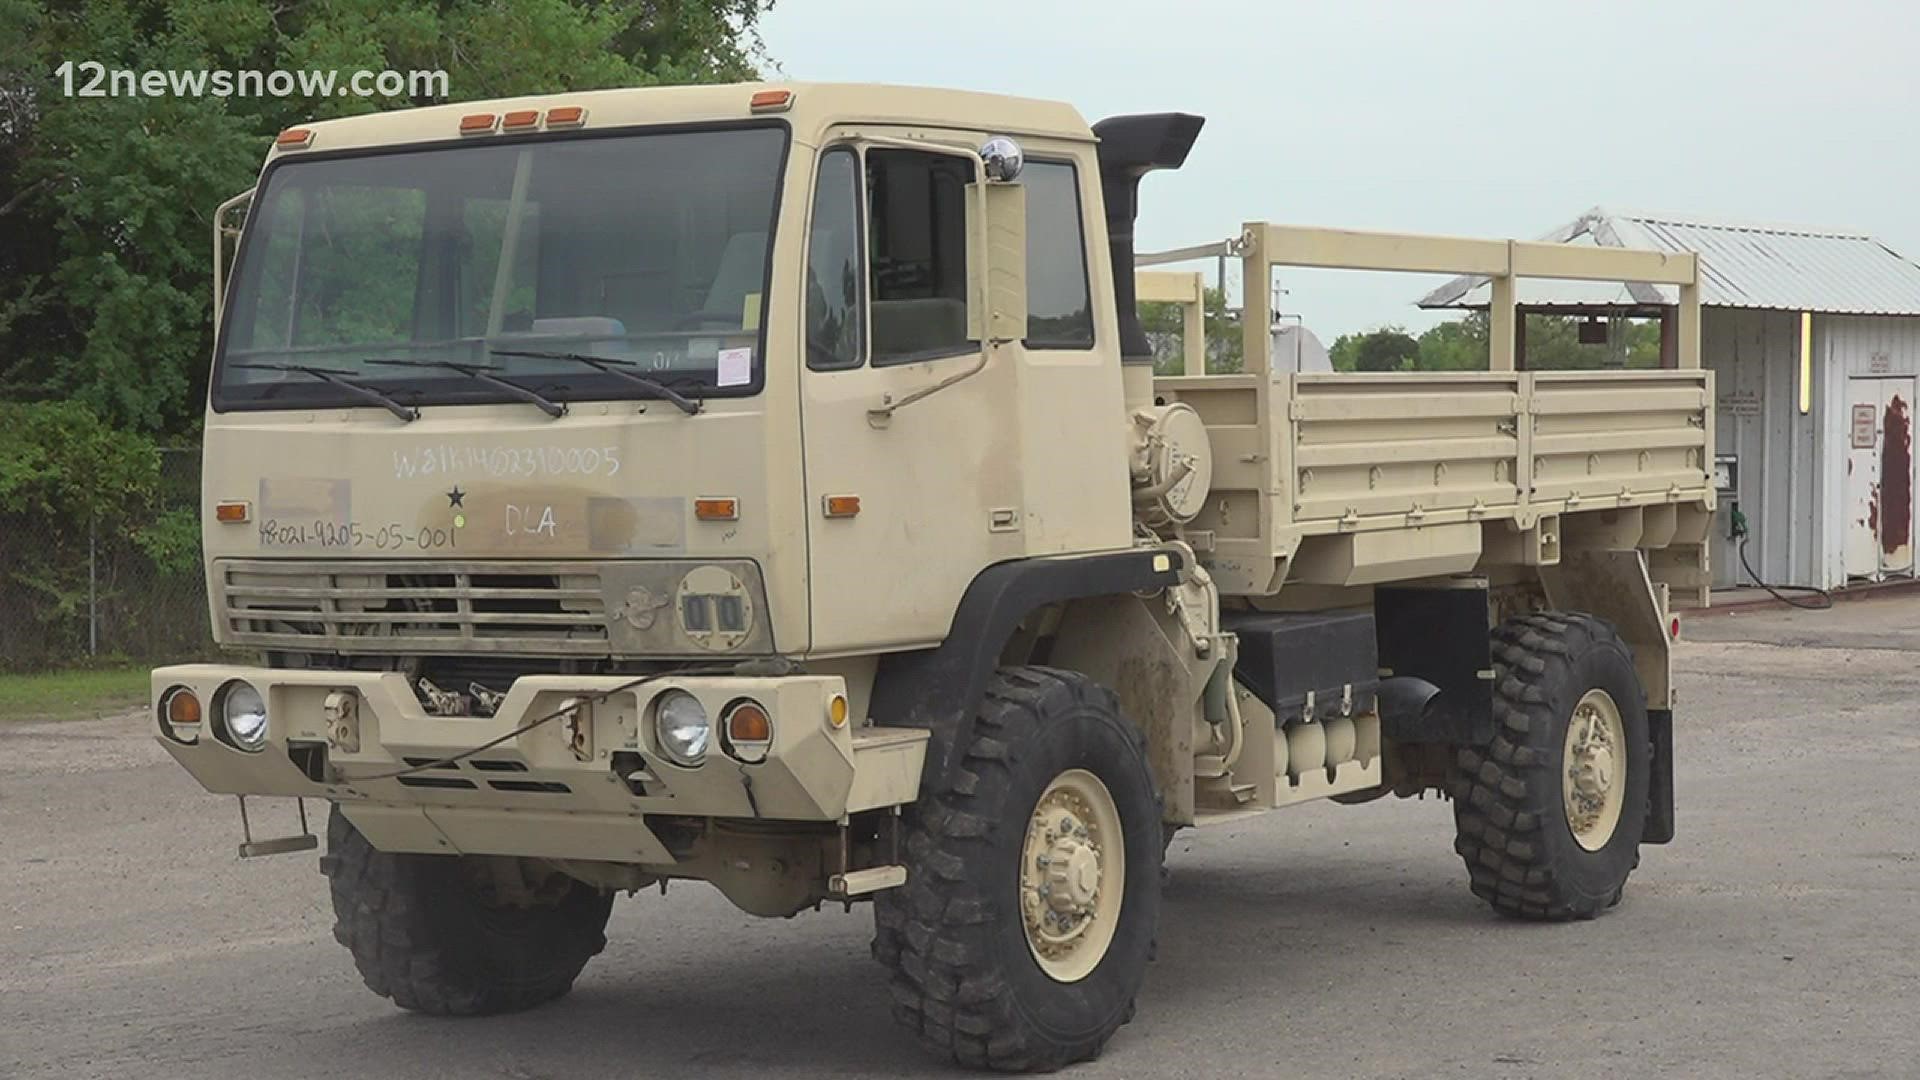 The county spent $26000 on four high-water, 2.5-ton vehicles to prepare for future storms.